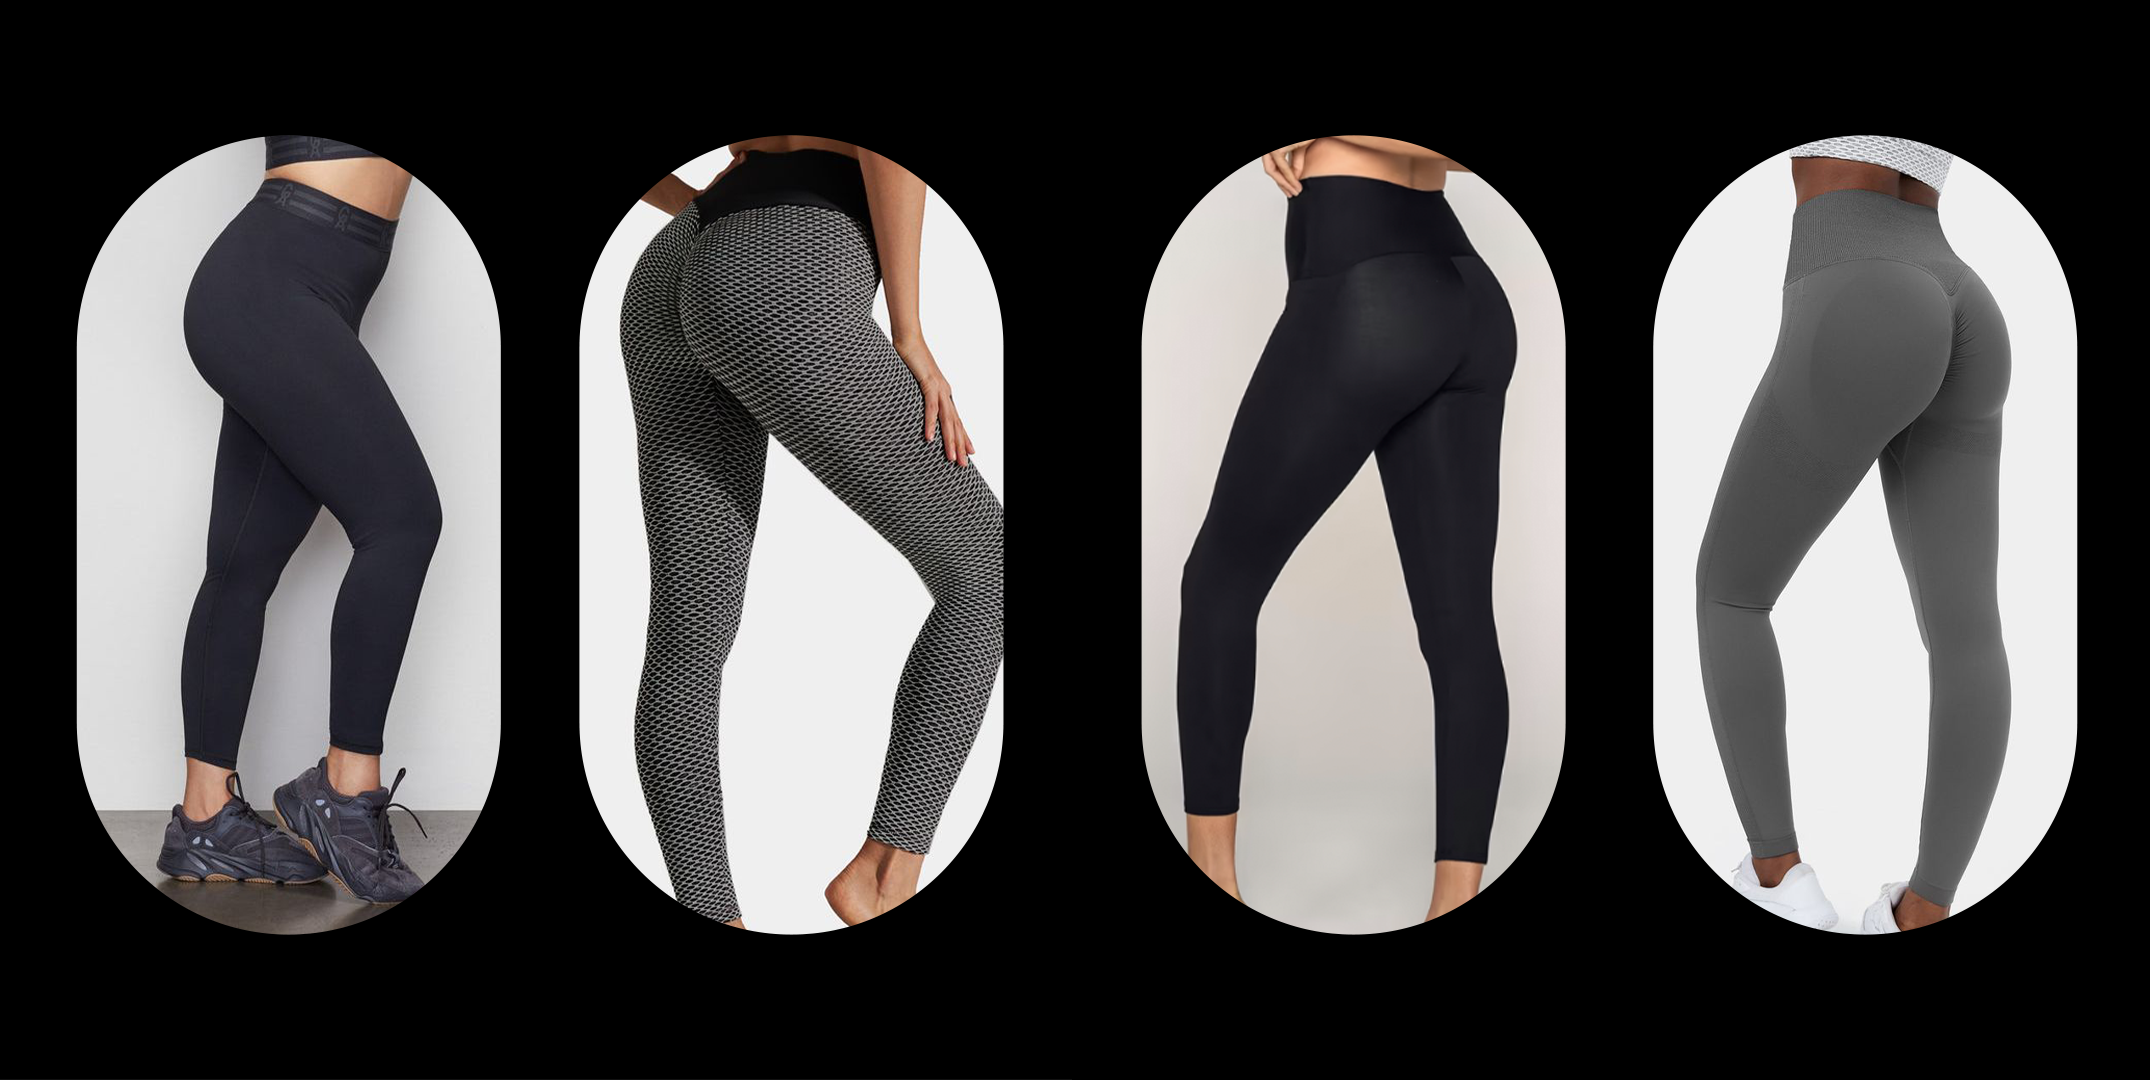 The 10 Best Types of Leggings with Images - Textile Apex